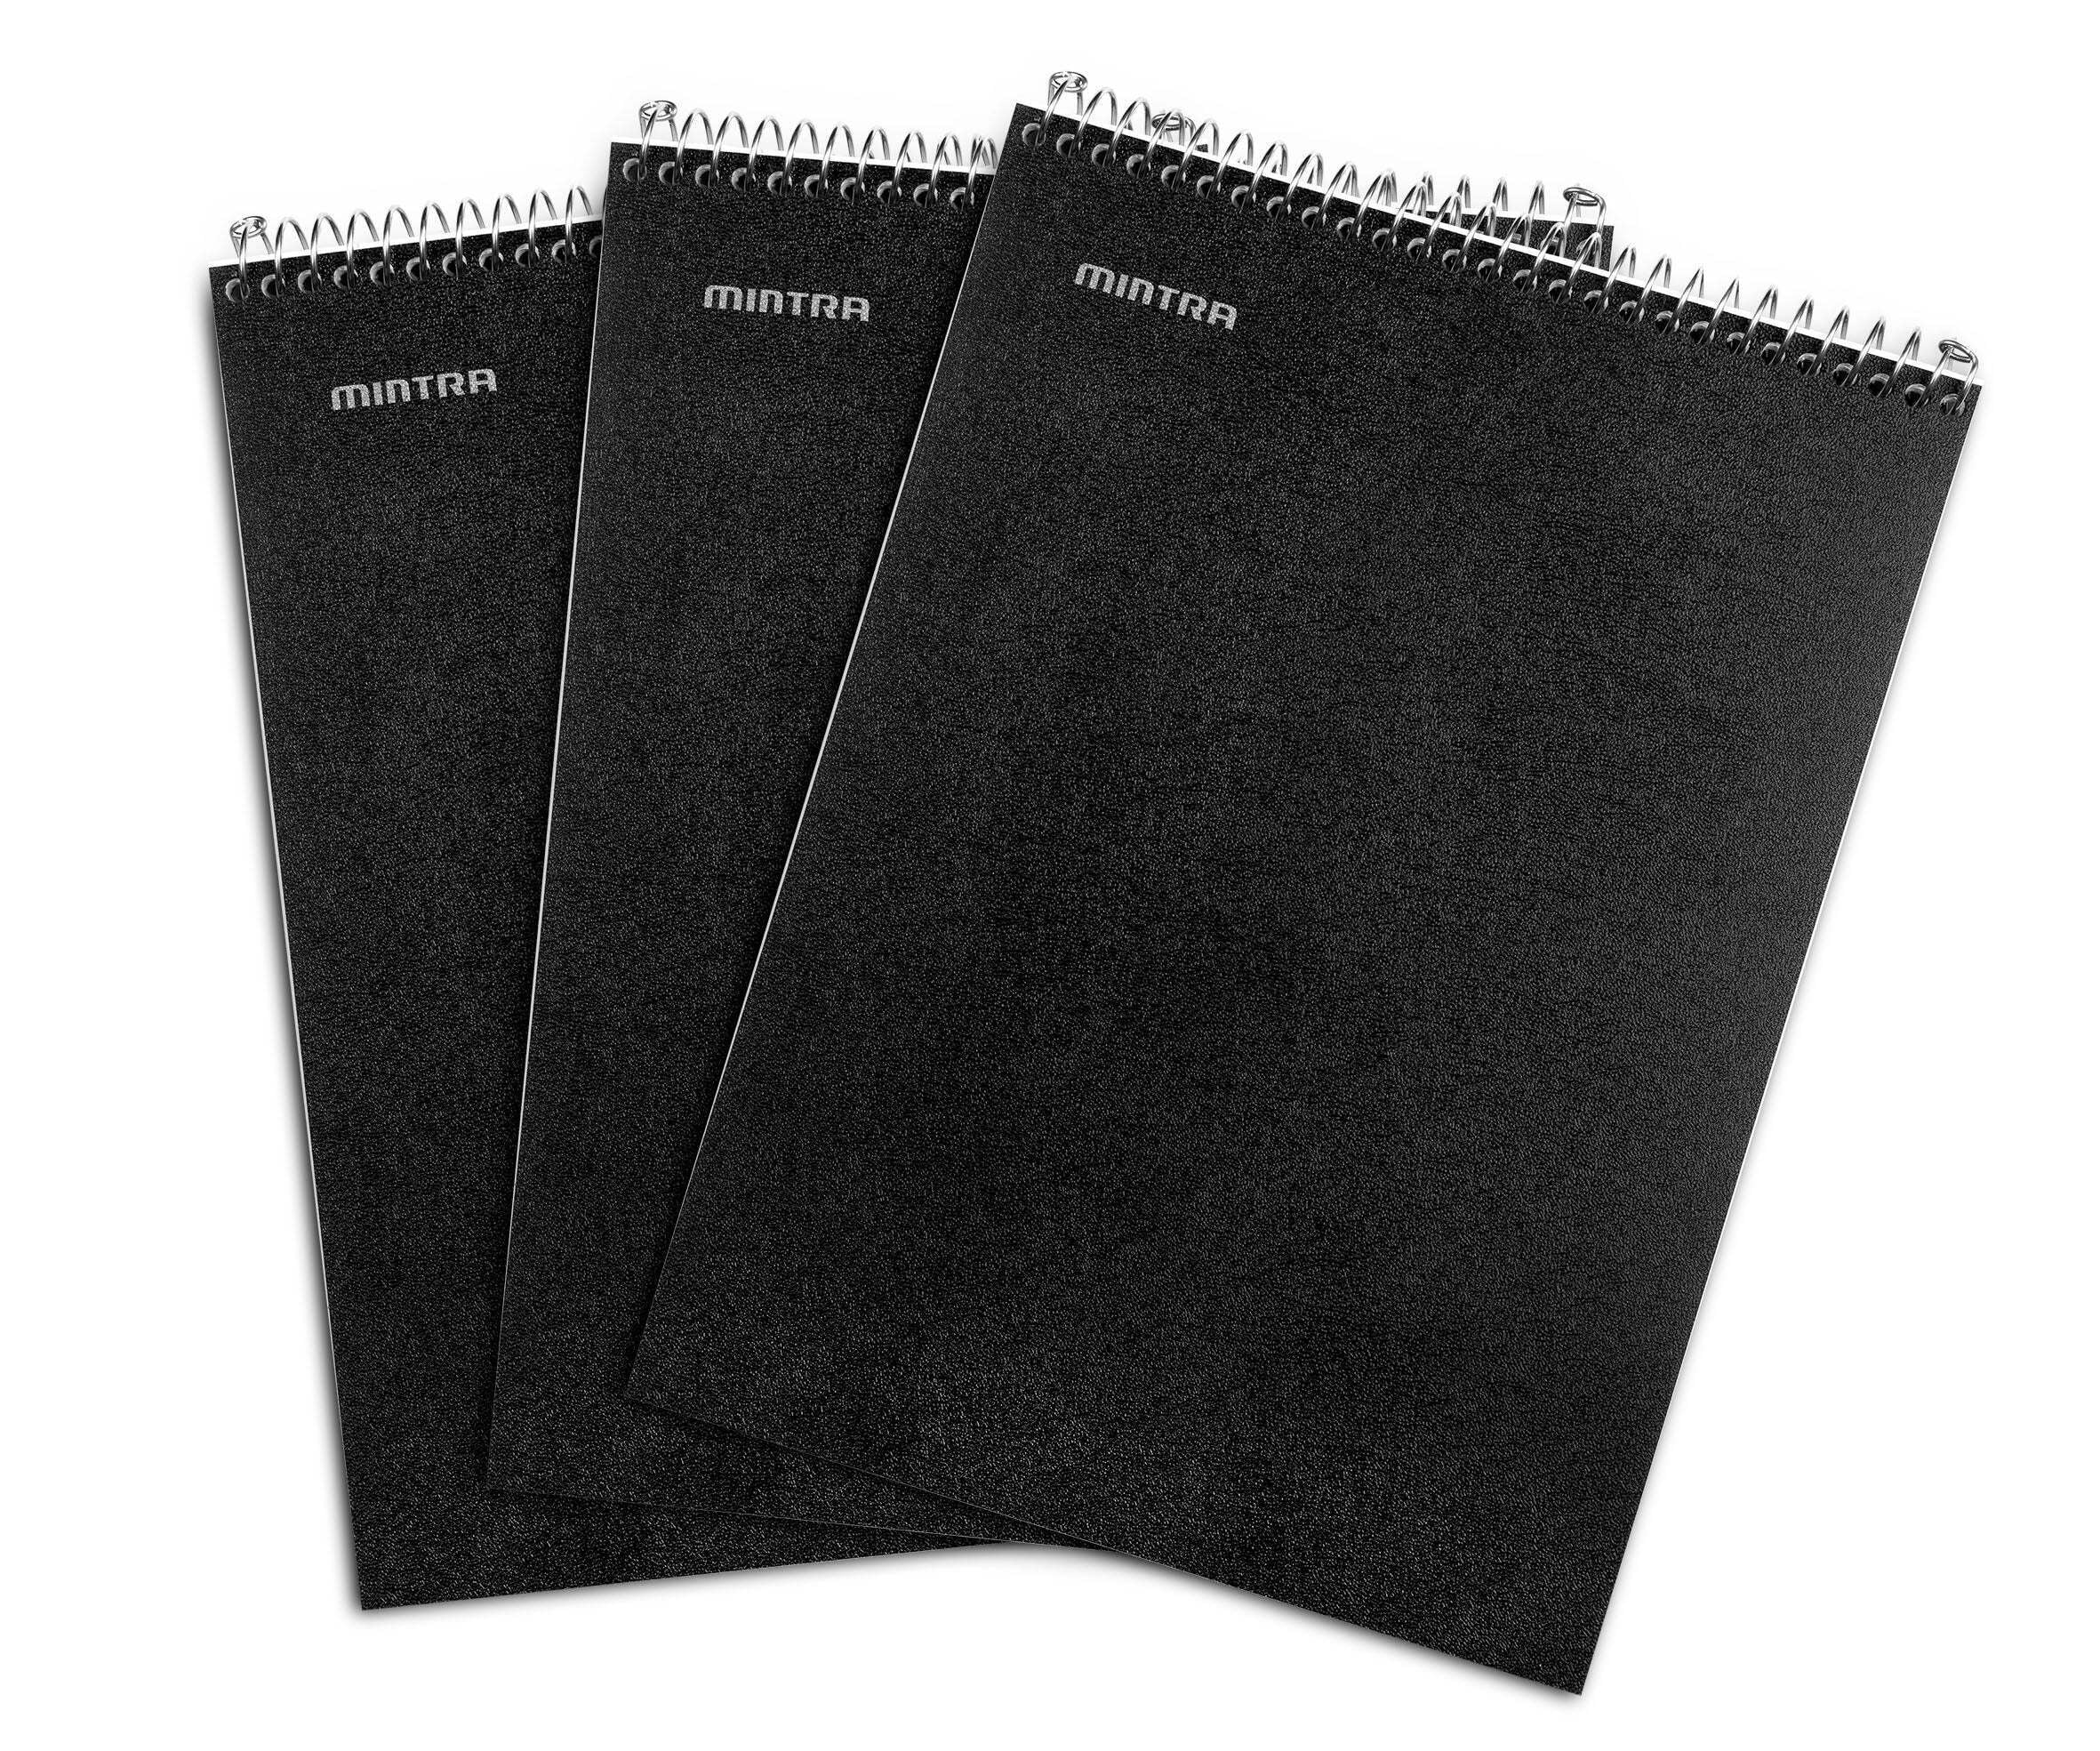 Norcom 3 Pack 100 Count Left-Handed Spiral Notebook, College Ruled